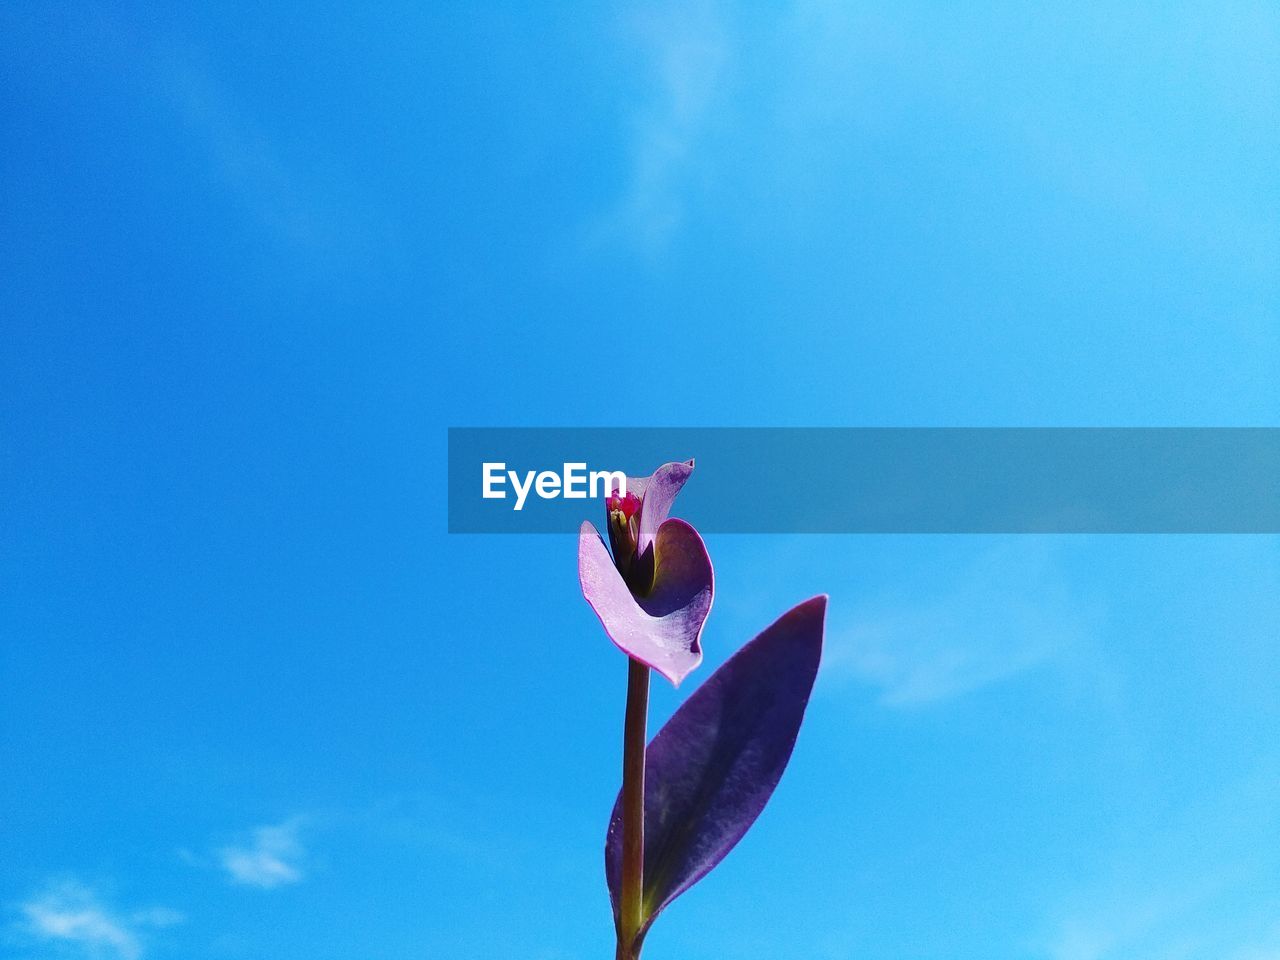 Low angle view of pink flower against blue sky